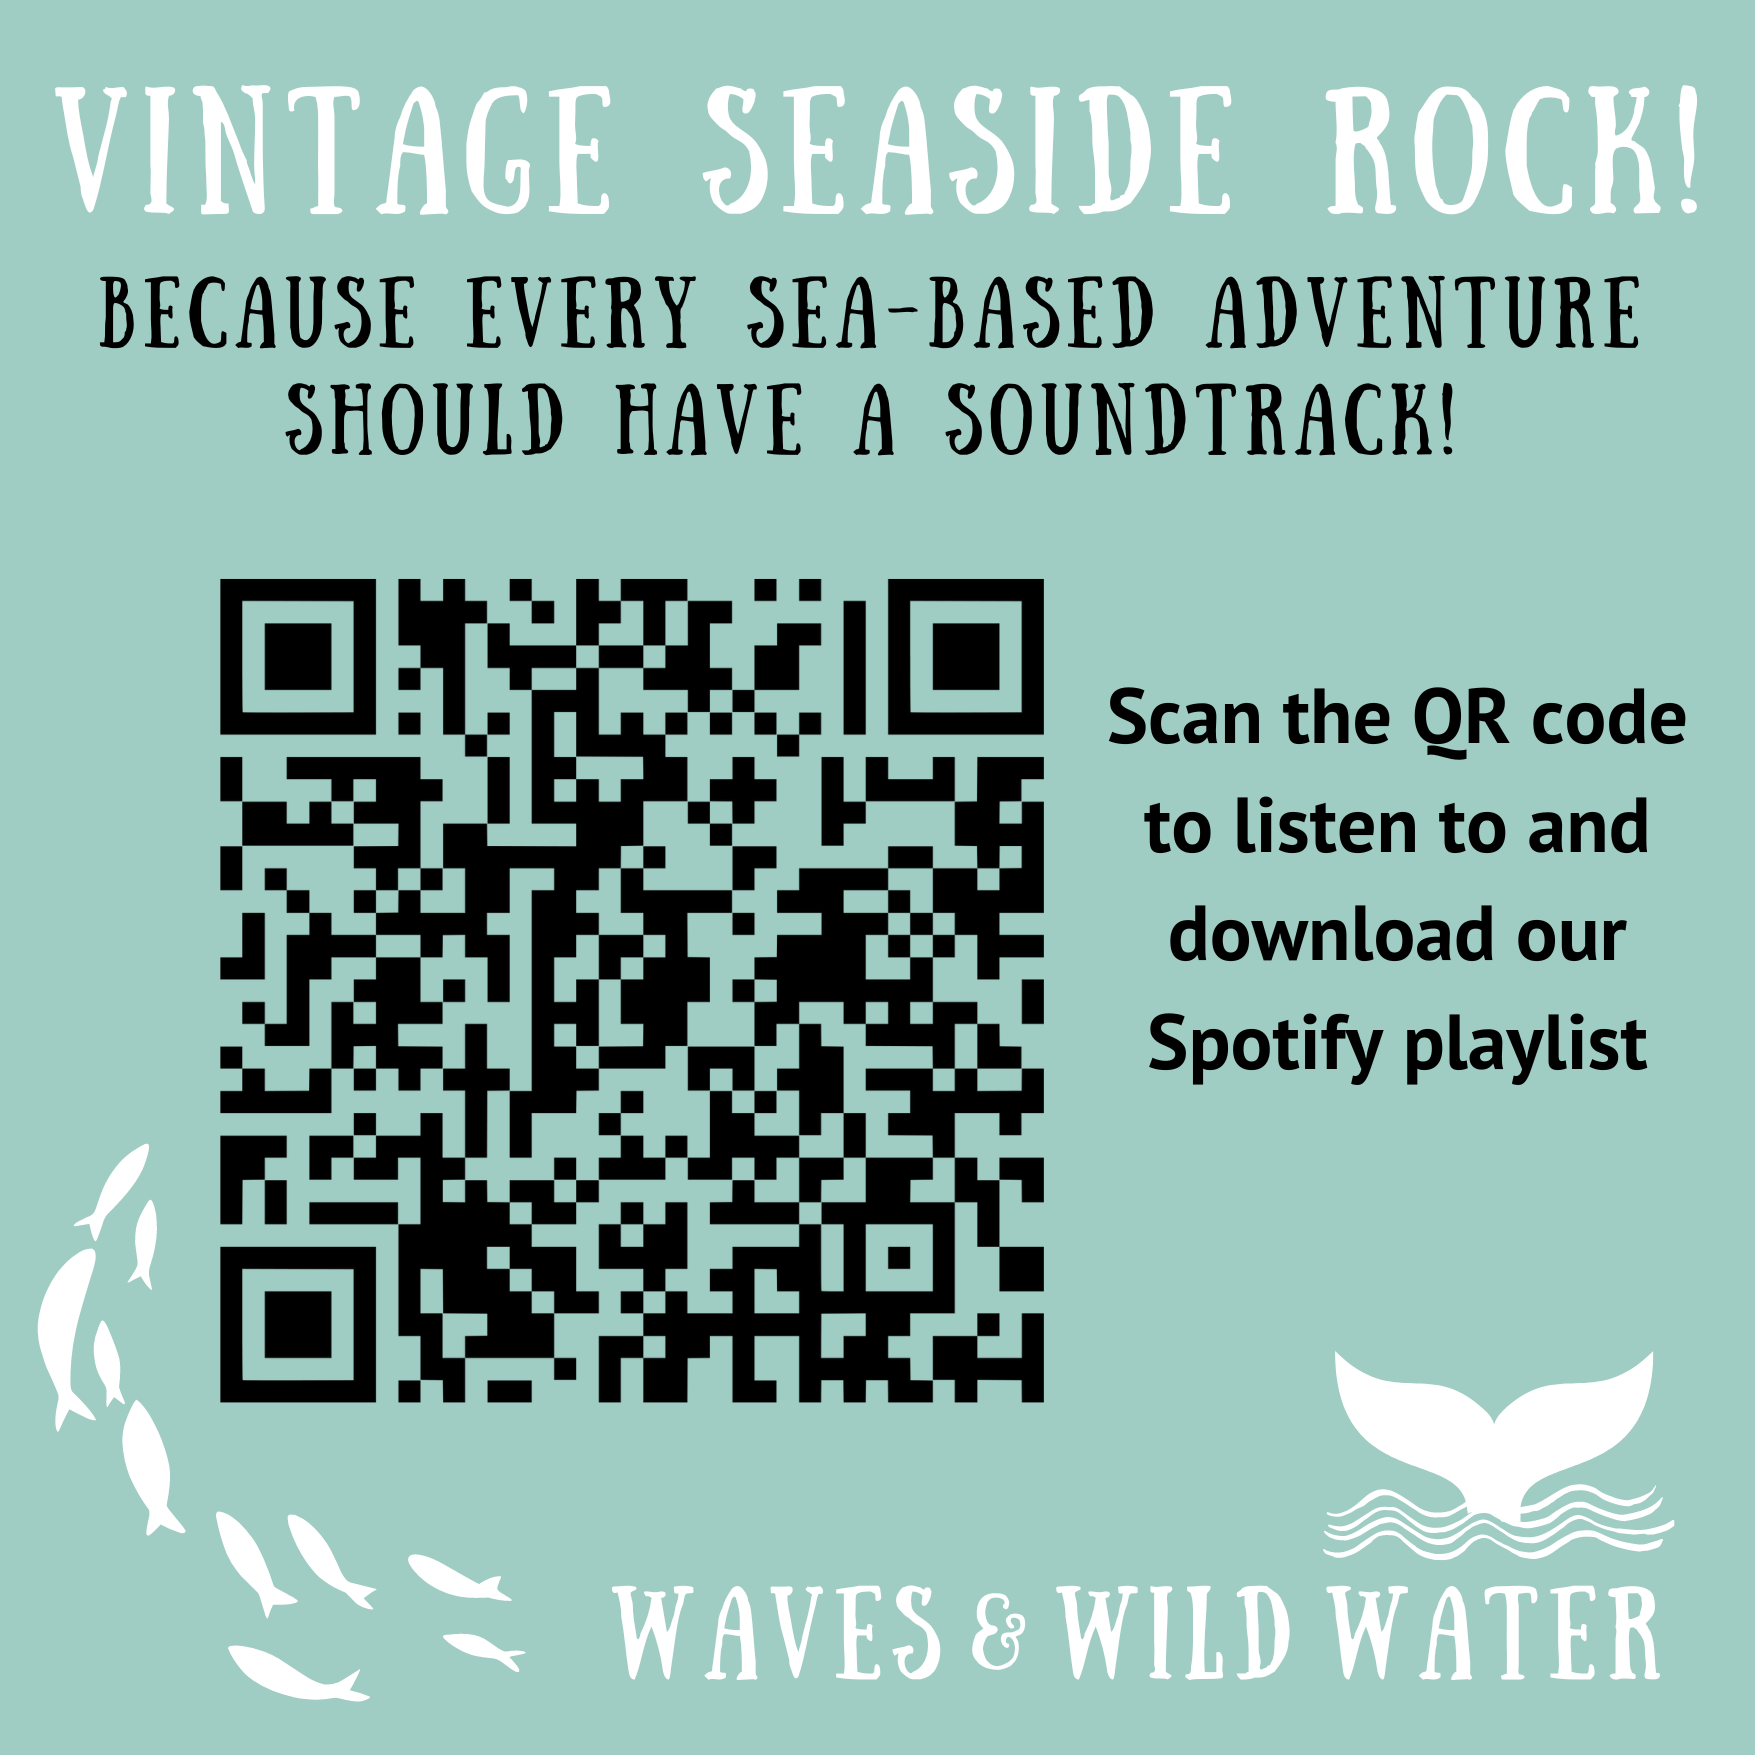 Because every sea or water based adventure should have a soundtrack, Waves and Wild Water have put together all the songs featured in our Seaside Rocks collection of tees and made them downloadable via Spotify by scanning this QR code.